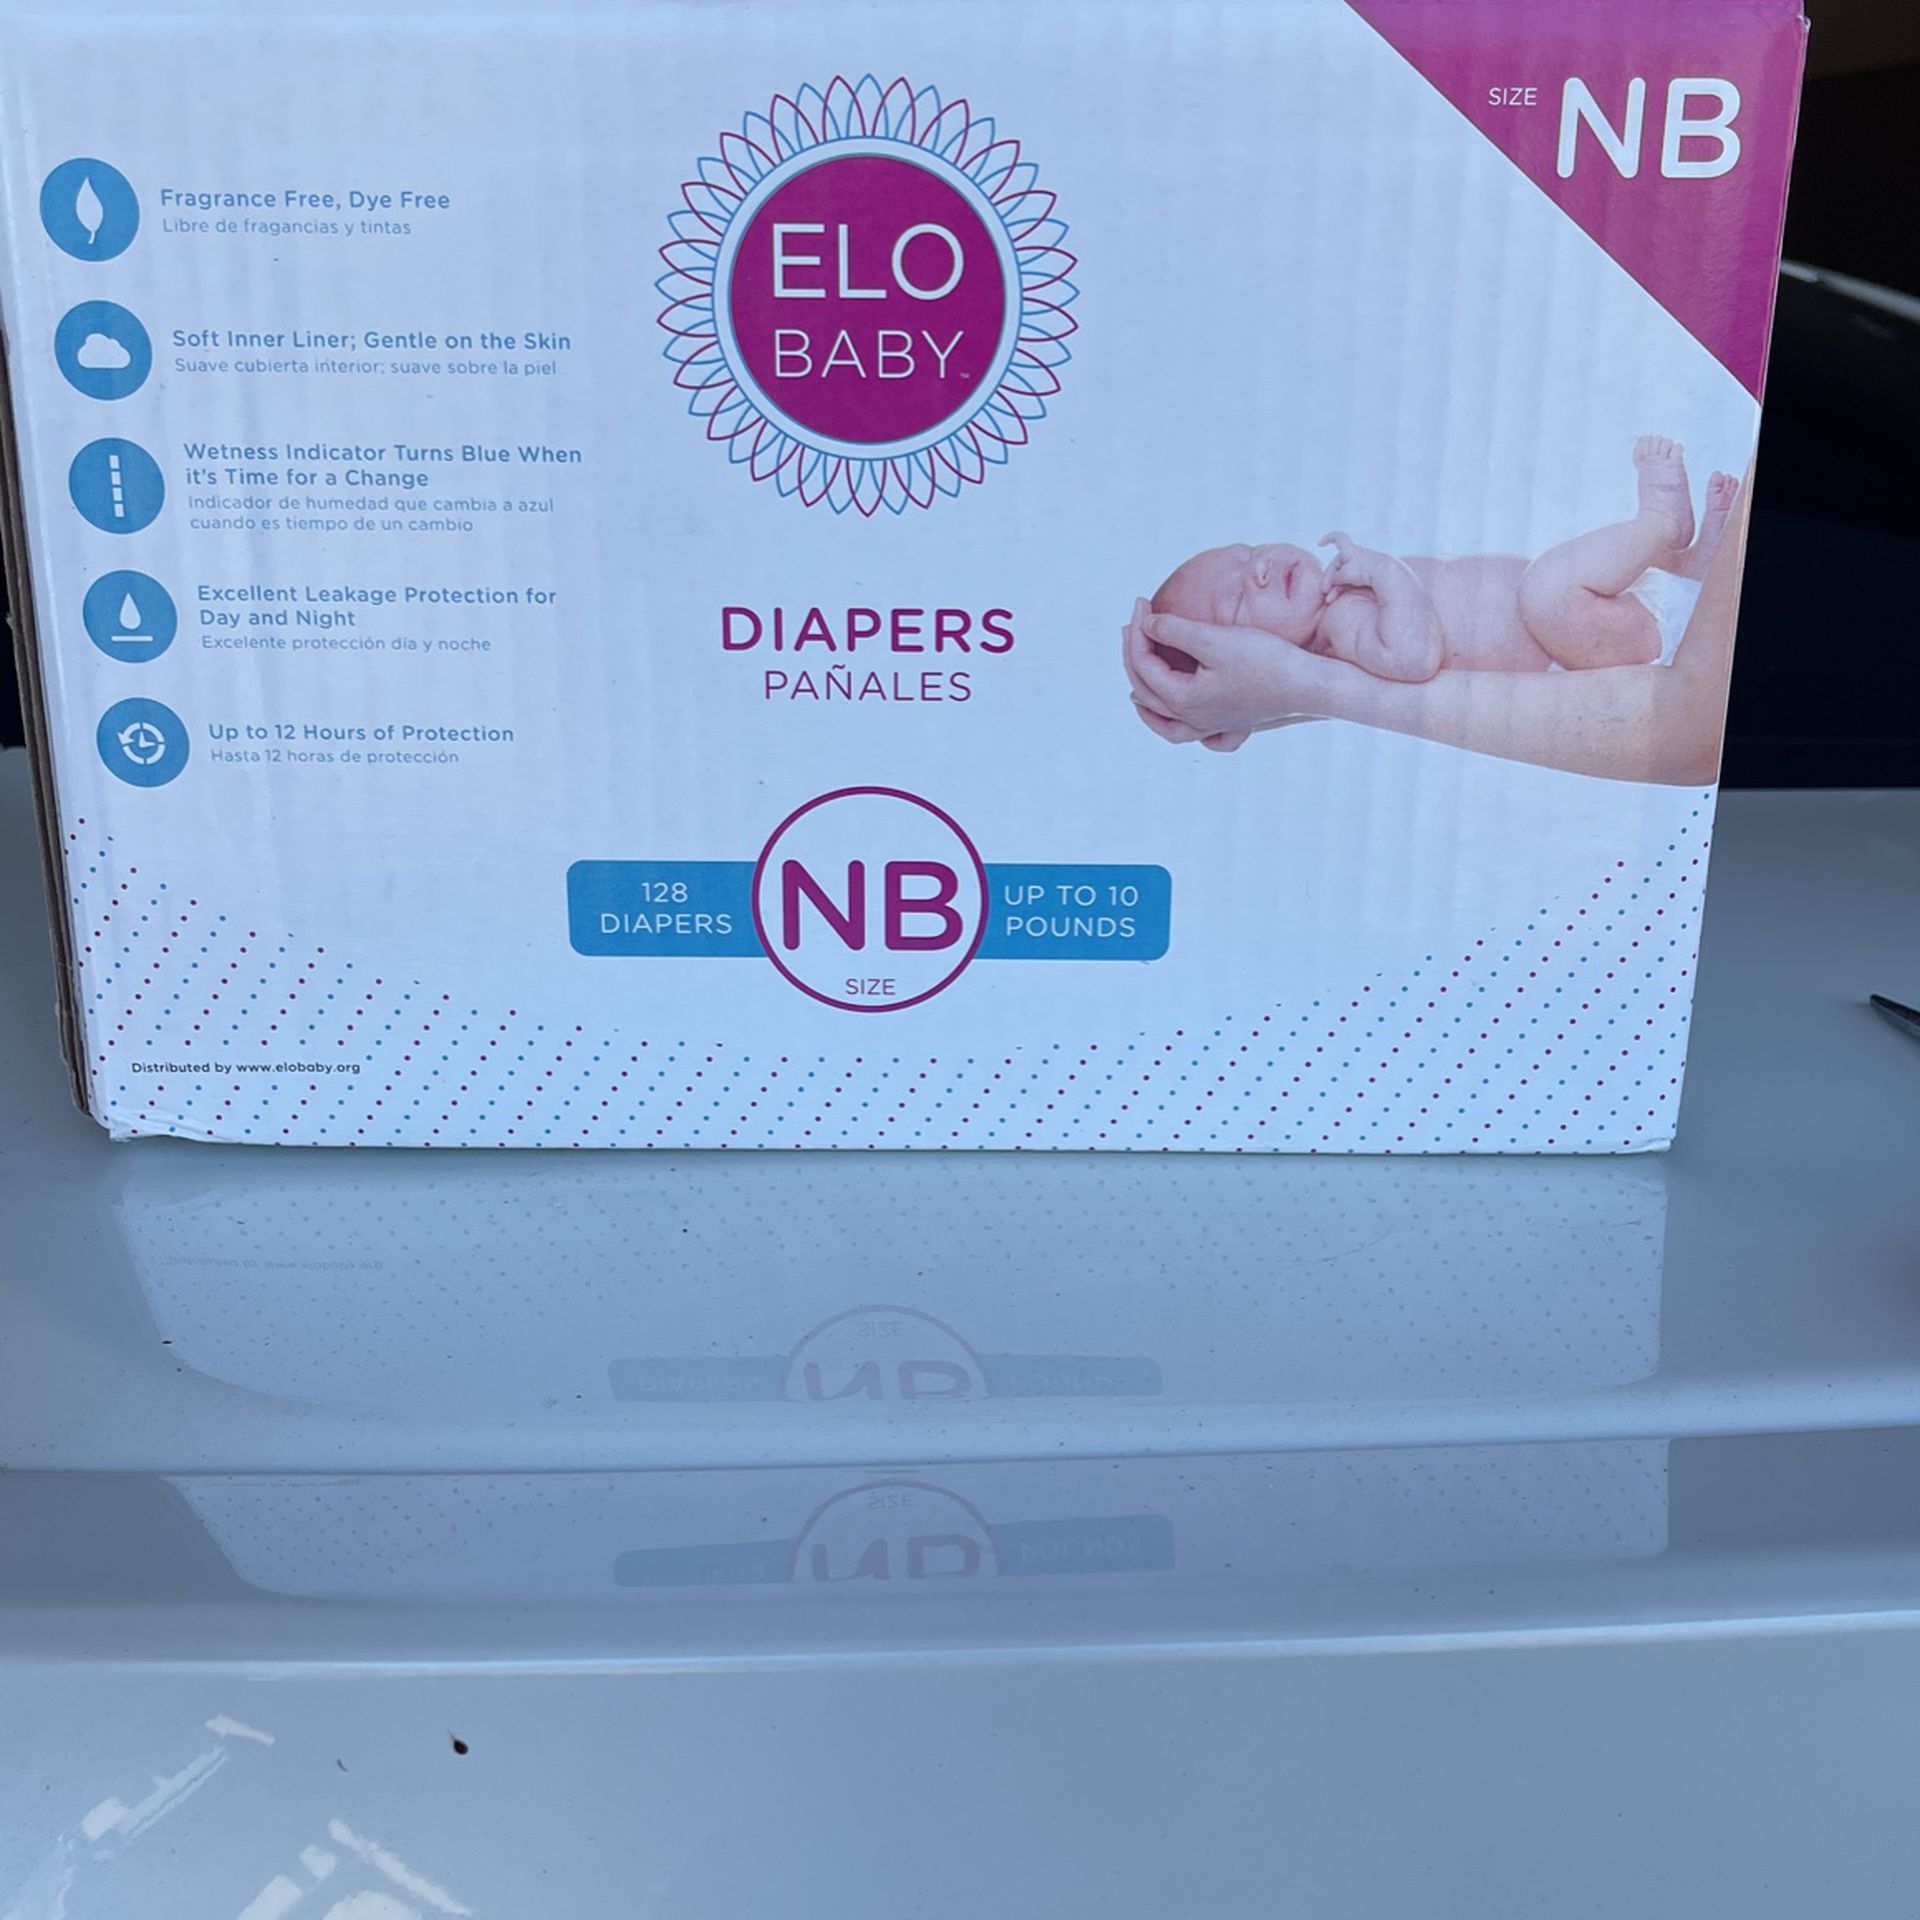 Diapers/ Pańales